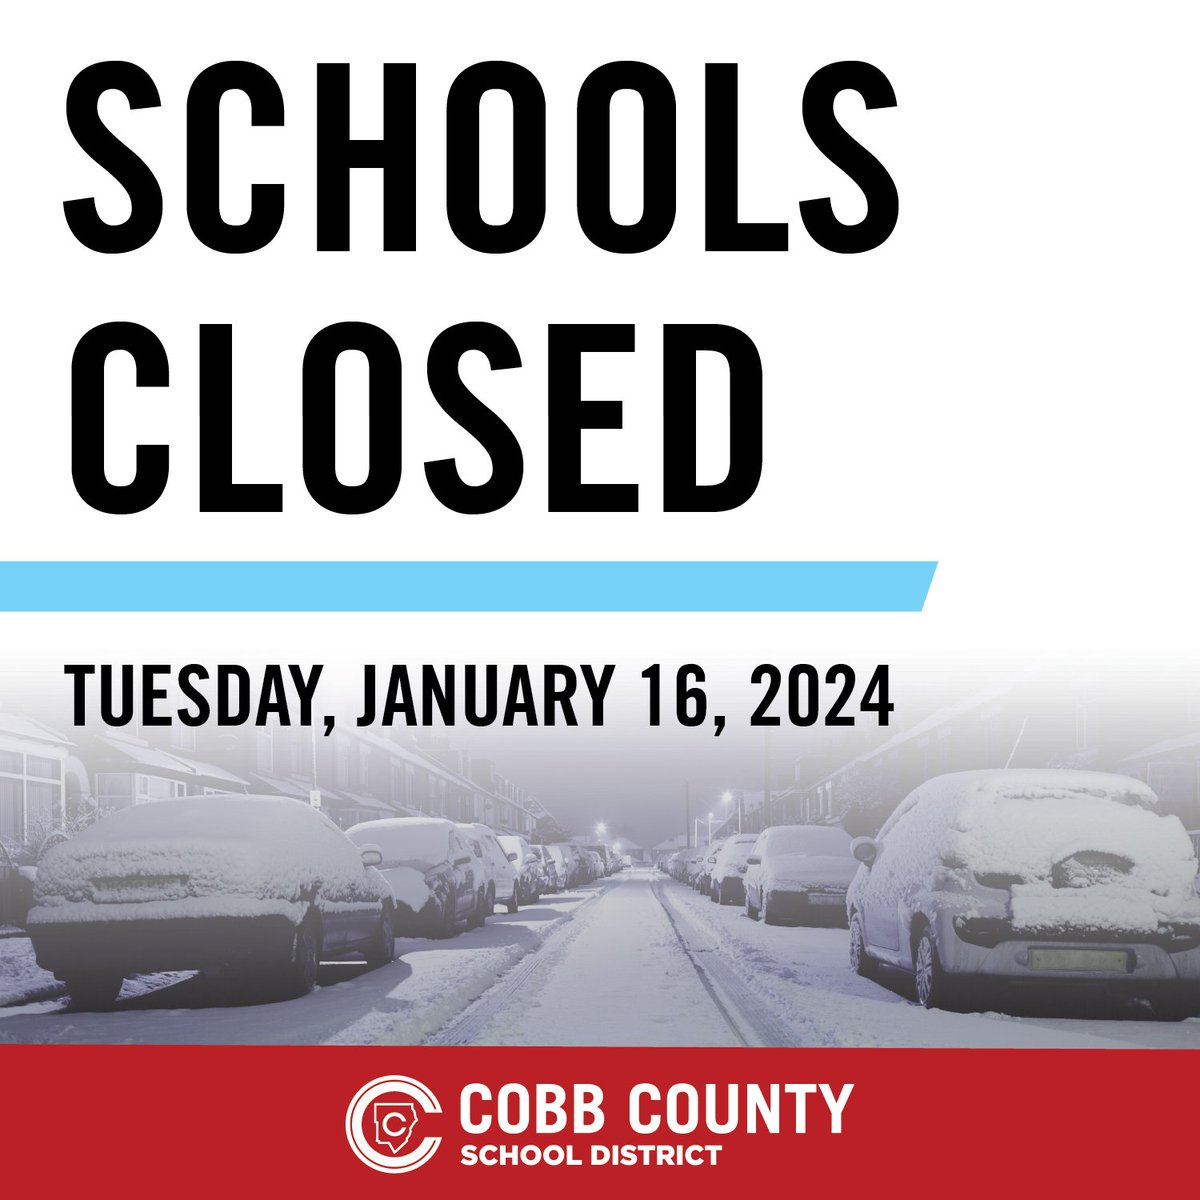 Due to a winter weather advisory, all Cobb schools will be closed on January 16, 2024. All after-school activities are also canceled. As always, the safety of students and staff is our top priority. We look forward to resuming normal operations as soon as conditions allow.